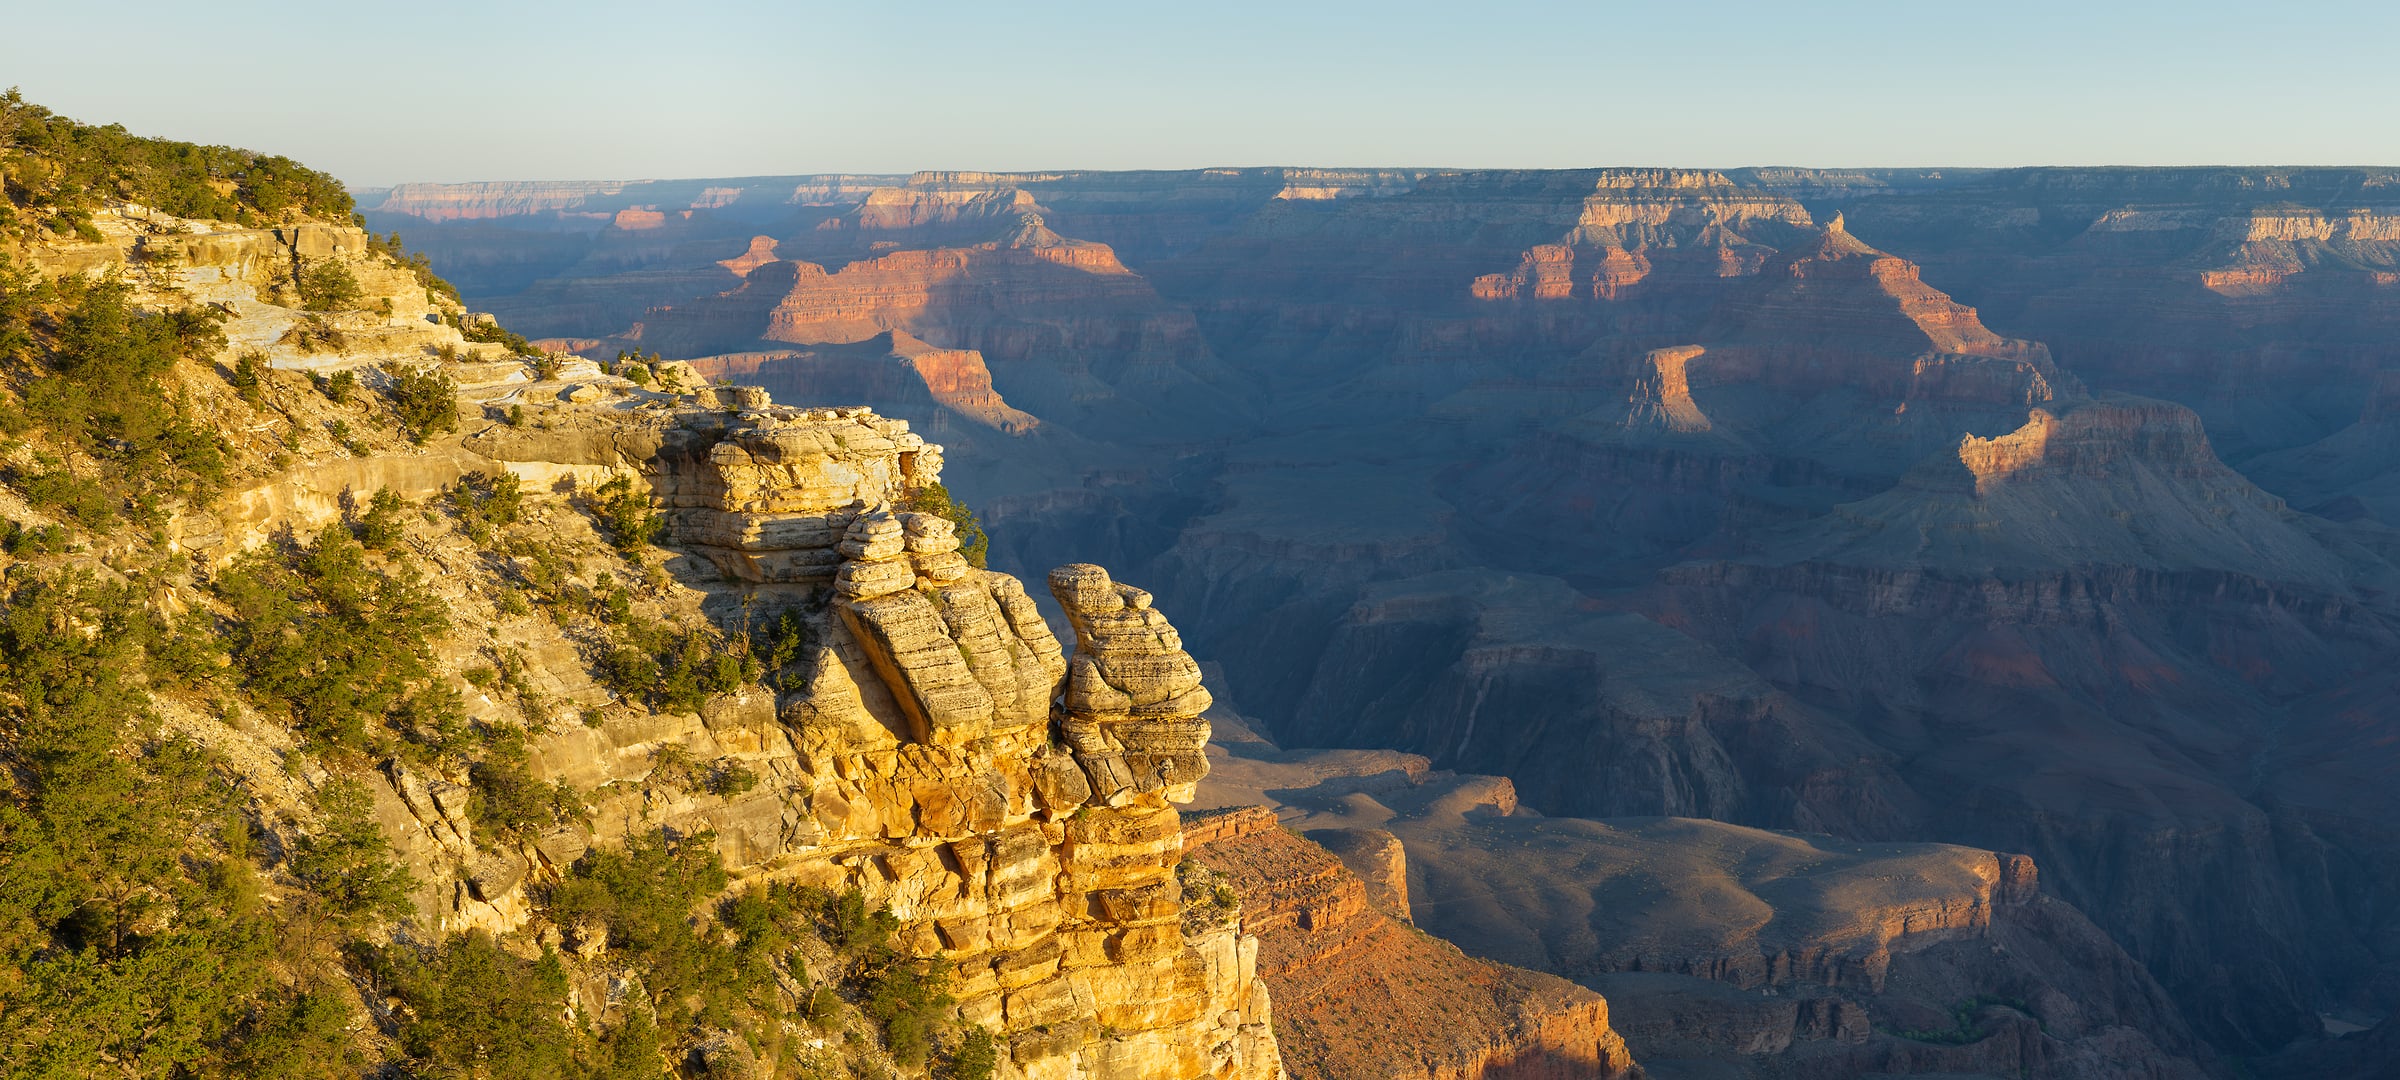 531 megapixels! A very high resolution, large-format VAST photo print of the Grand Canyon from Mather Point at sunrise; landscape photograph created by Greg Probst in Grand Canyon National Park, Arizona.